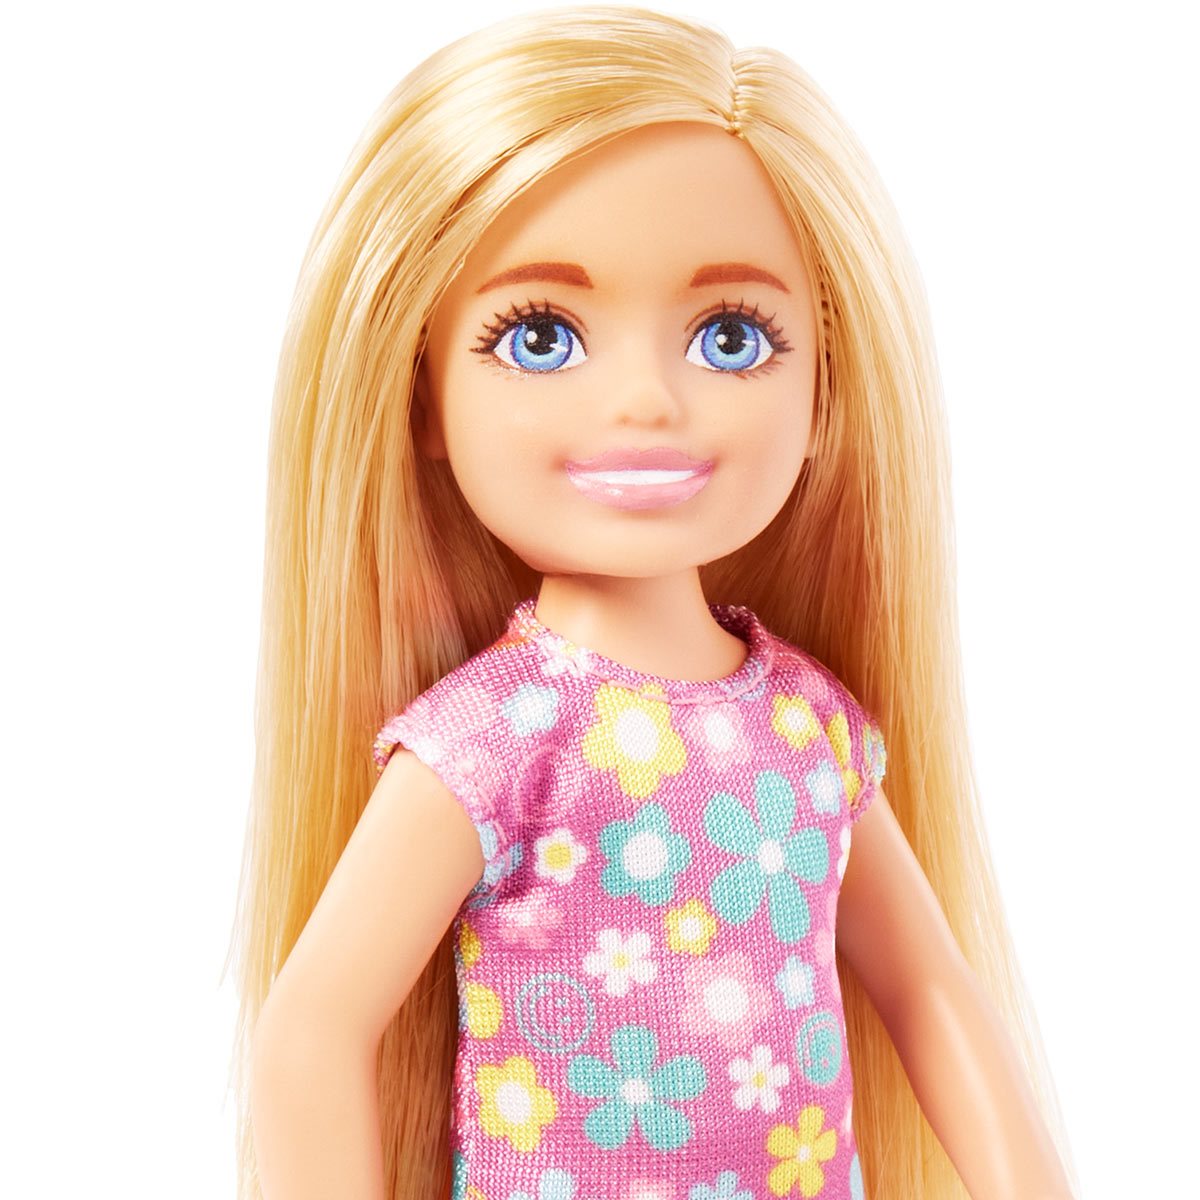 Barbie Chelsea Doll in Floral Dress - Entertainment Earth